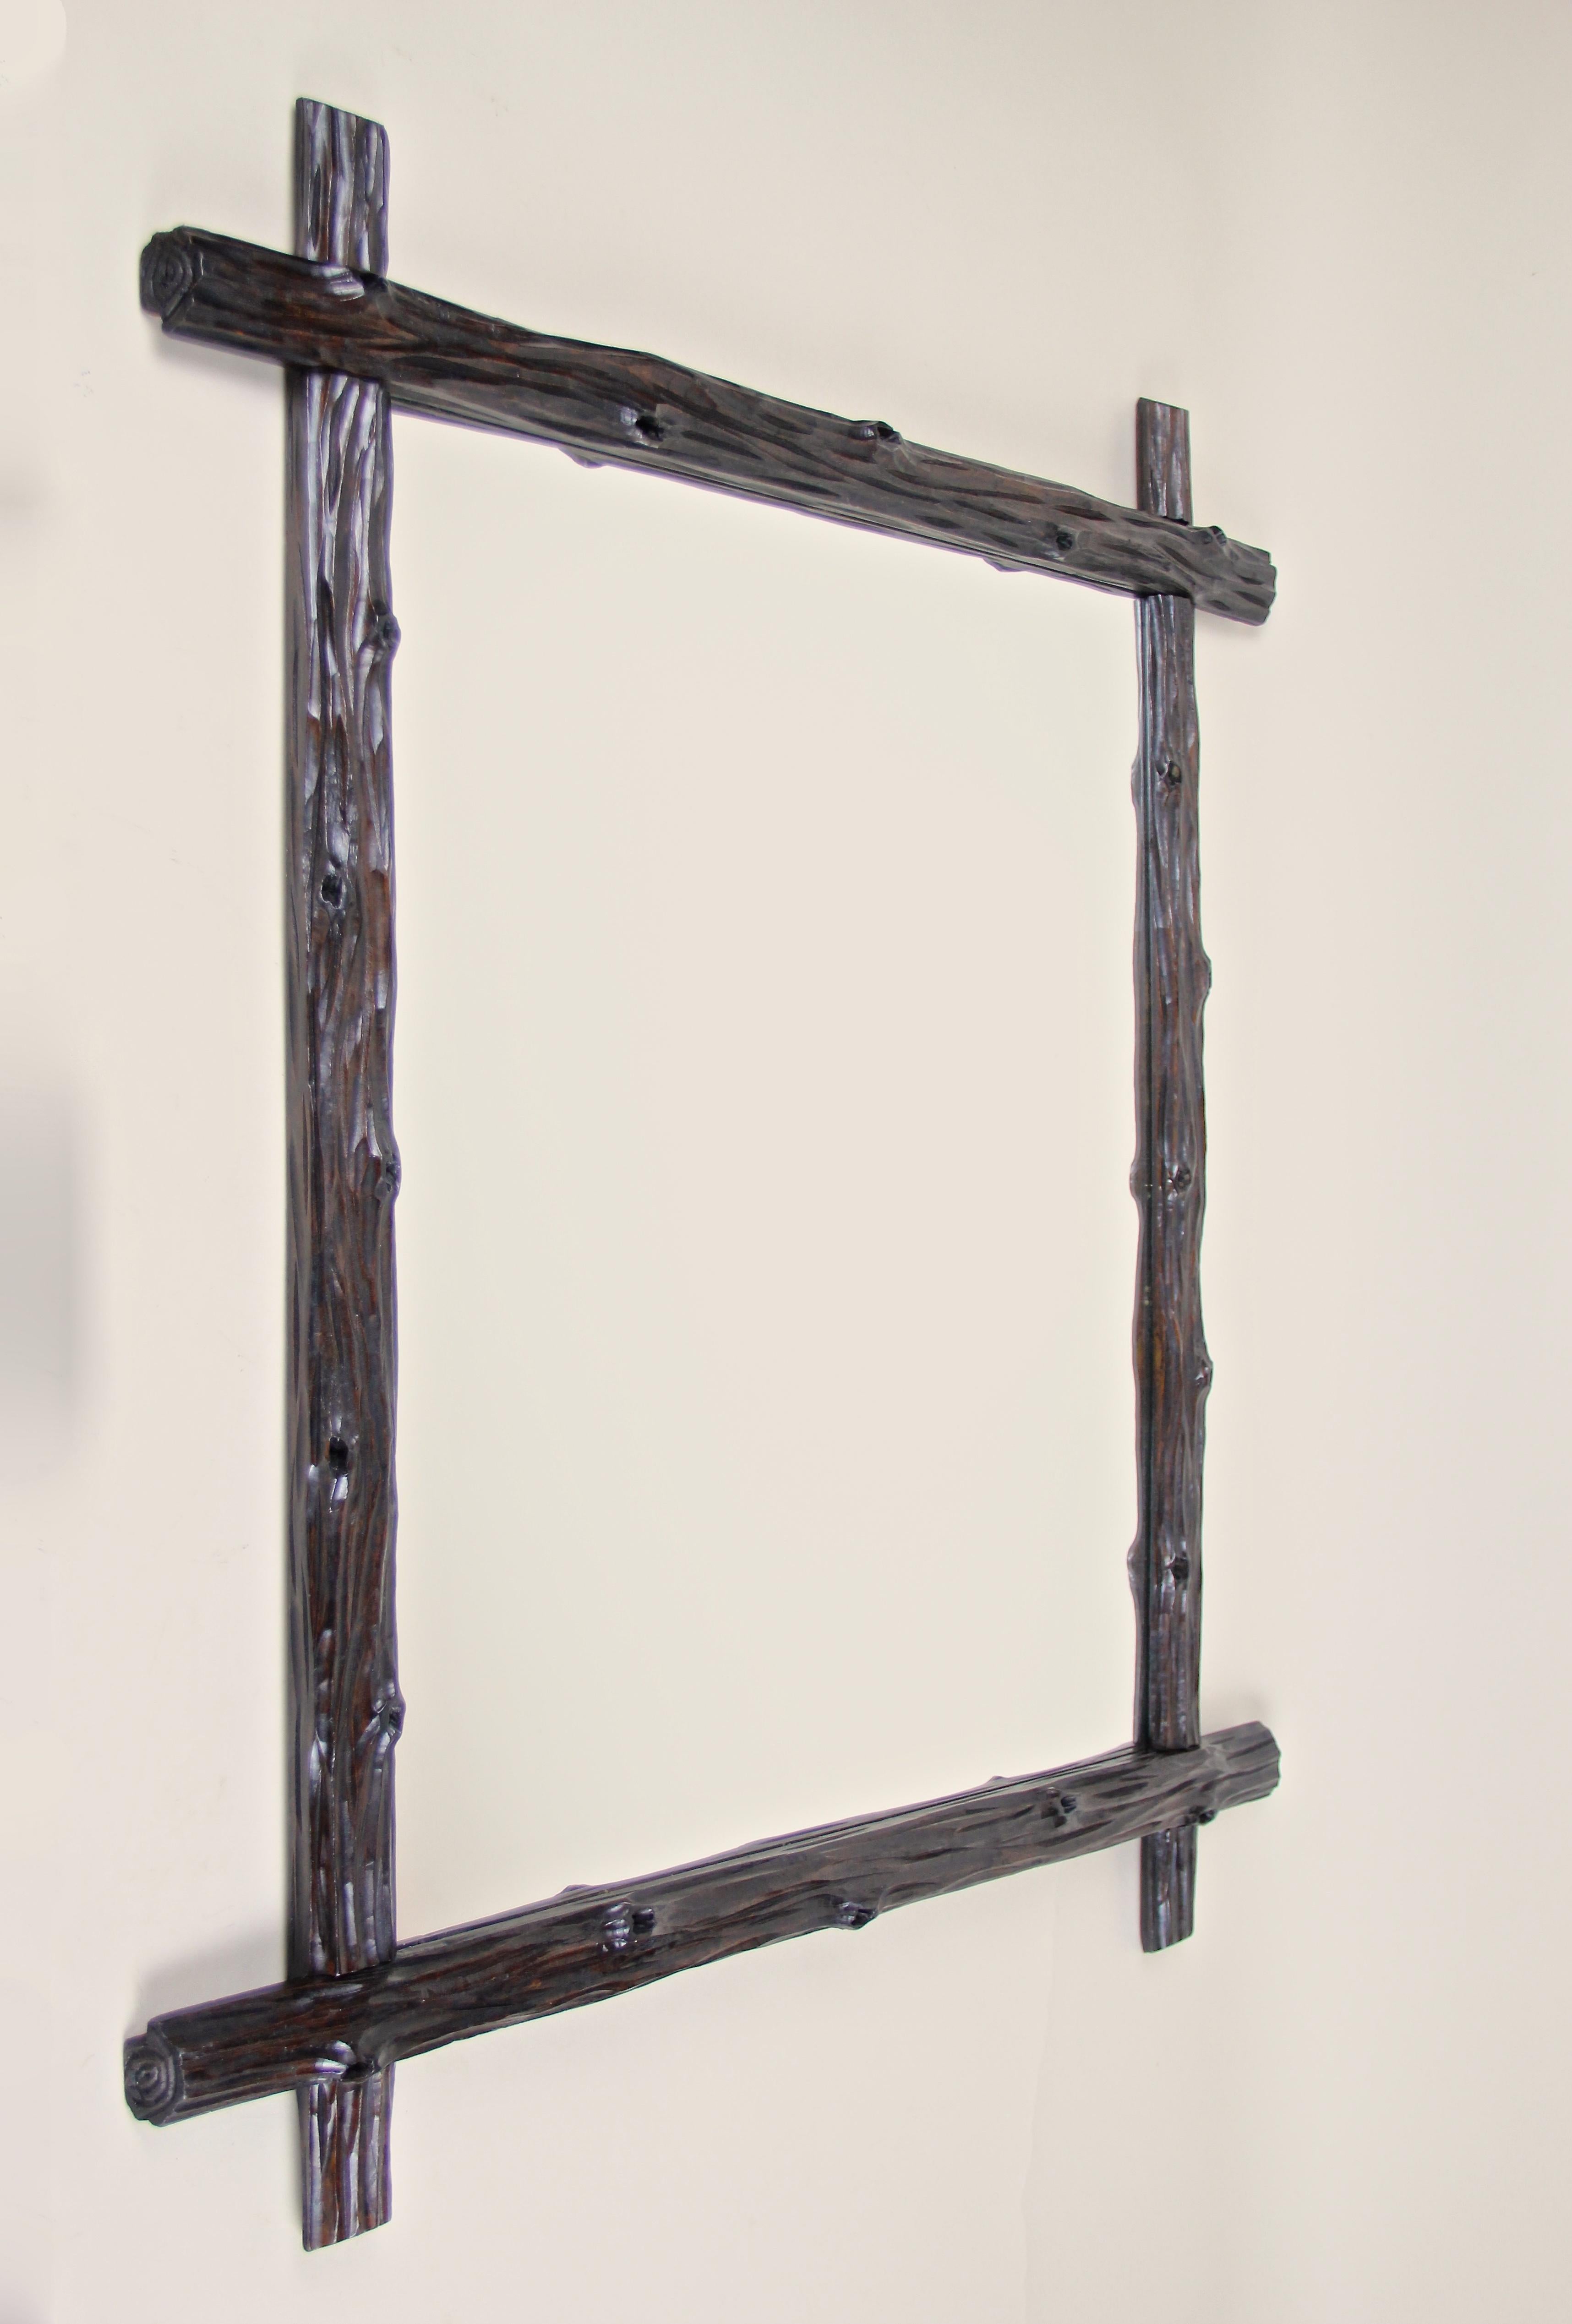 Phenomenal rustic Black Forest wall mirror from Austria, circa 1880. This exceptional antique wall mirror impresses with a simple but elegant 